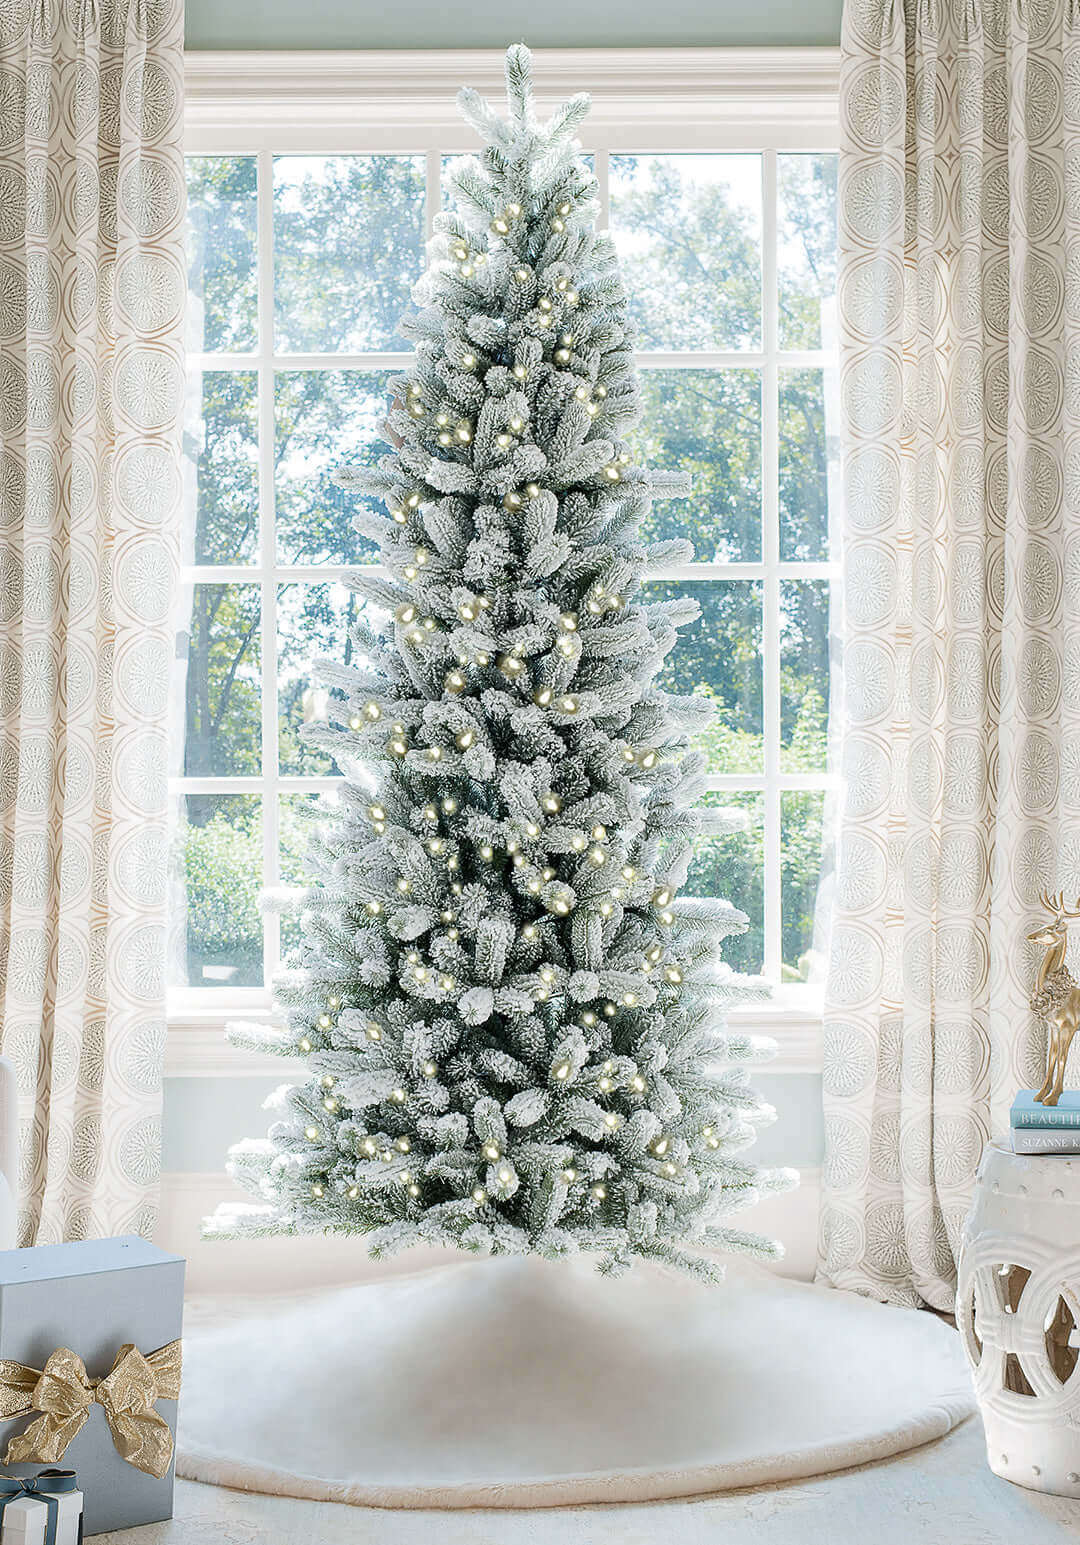 King of Christmas 12' King Flock® Slim Quick-Shape Artificial Christmas Tree with 1250 Warm White LED Lights